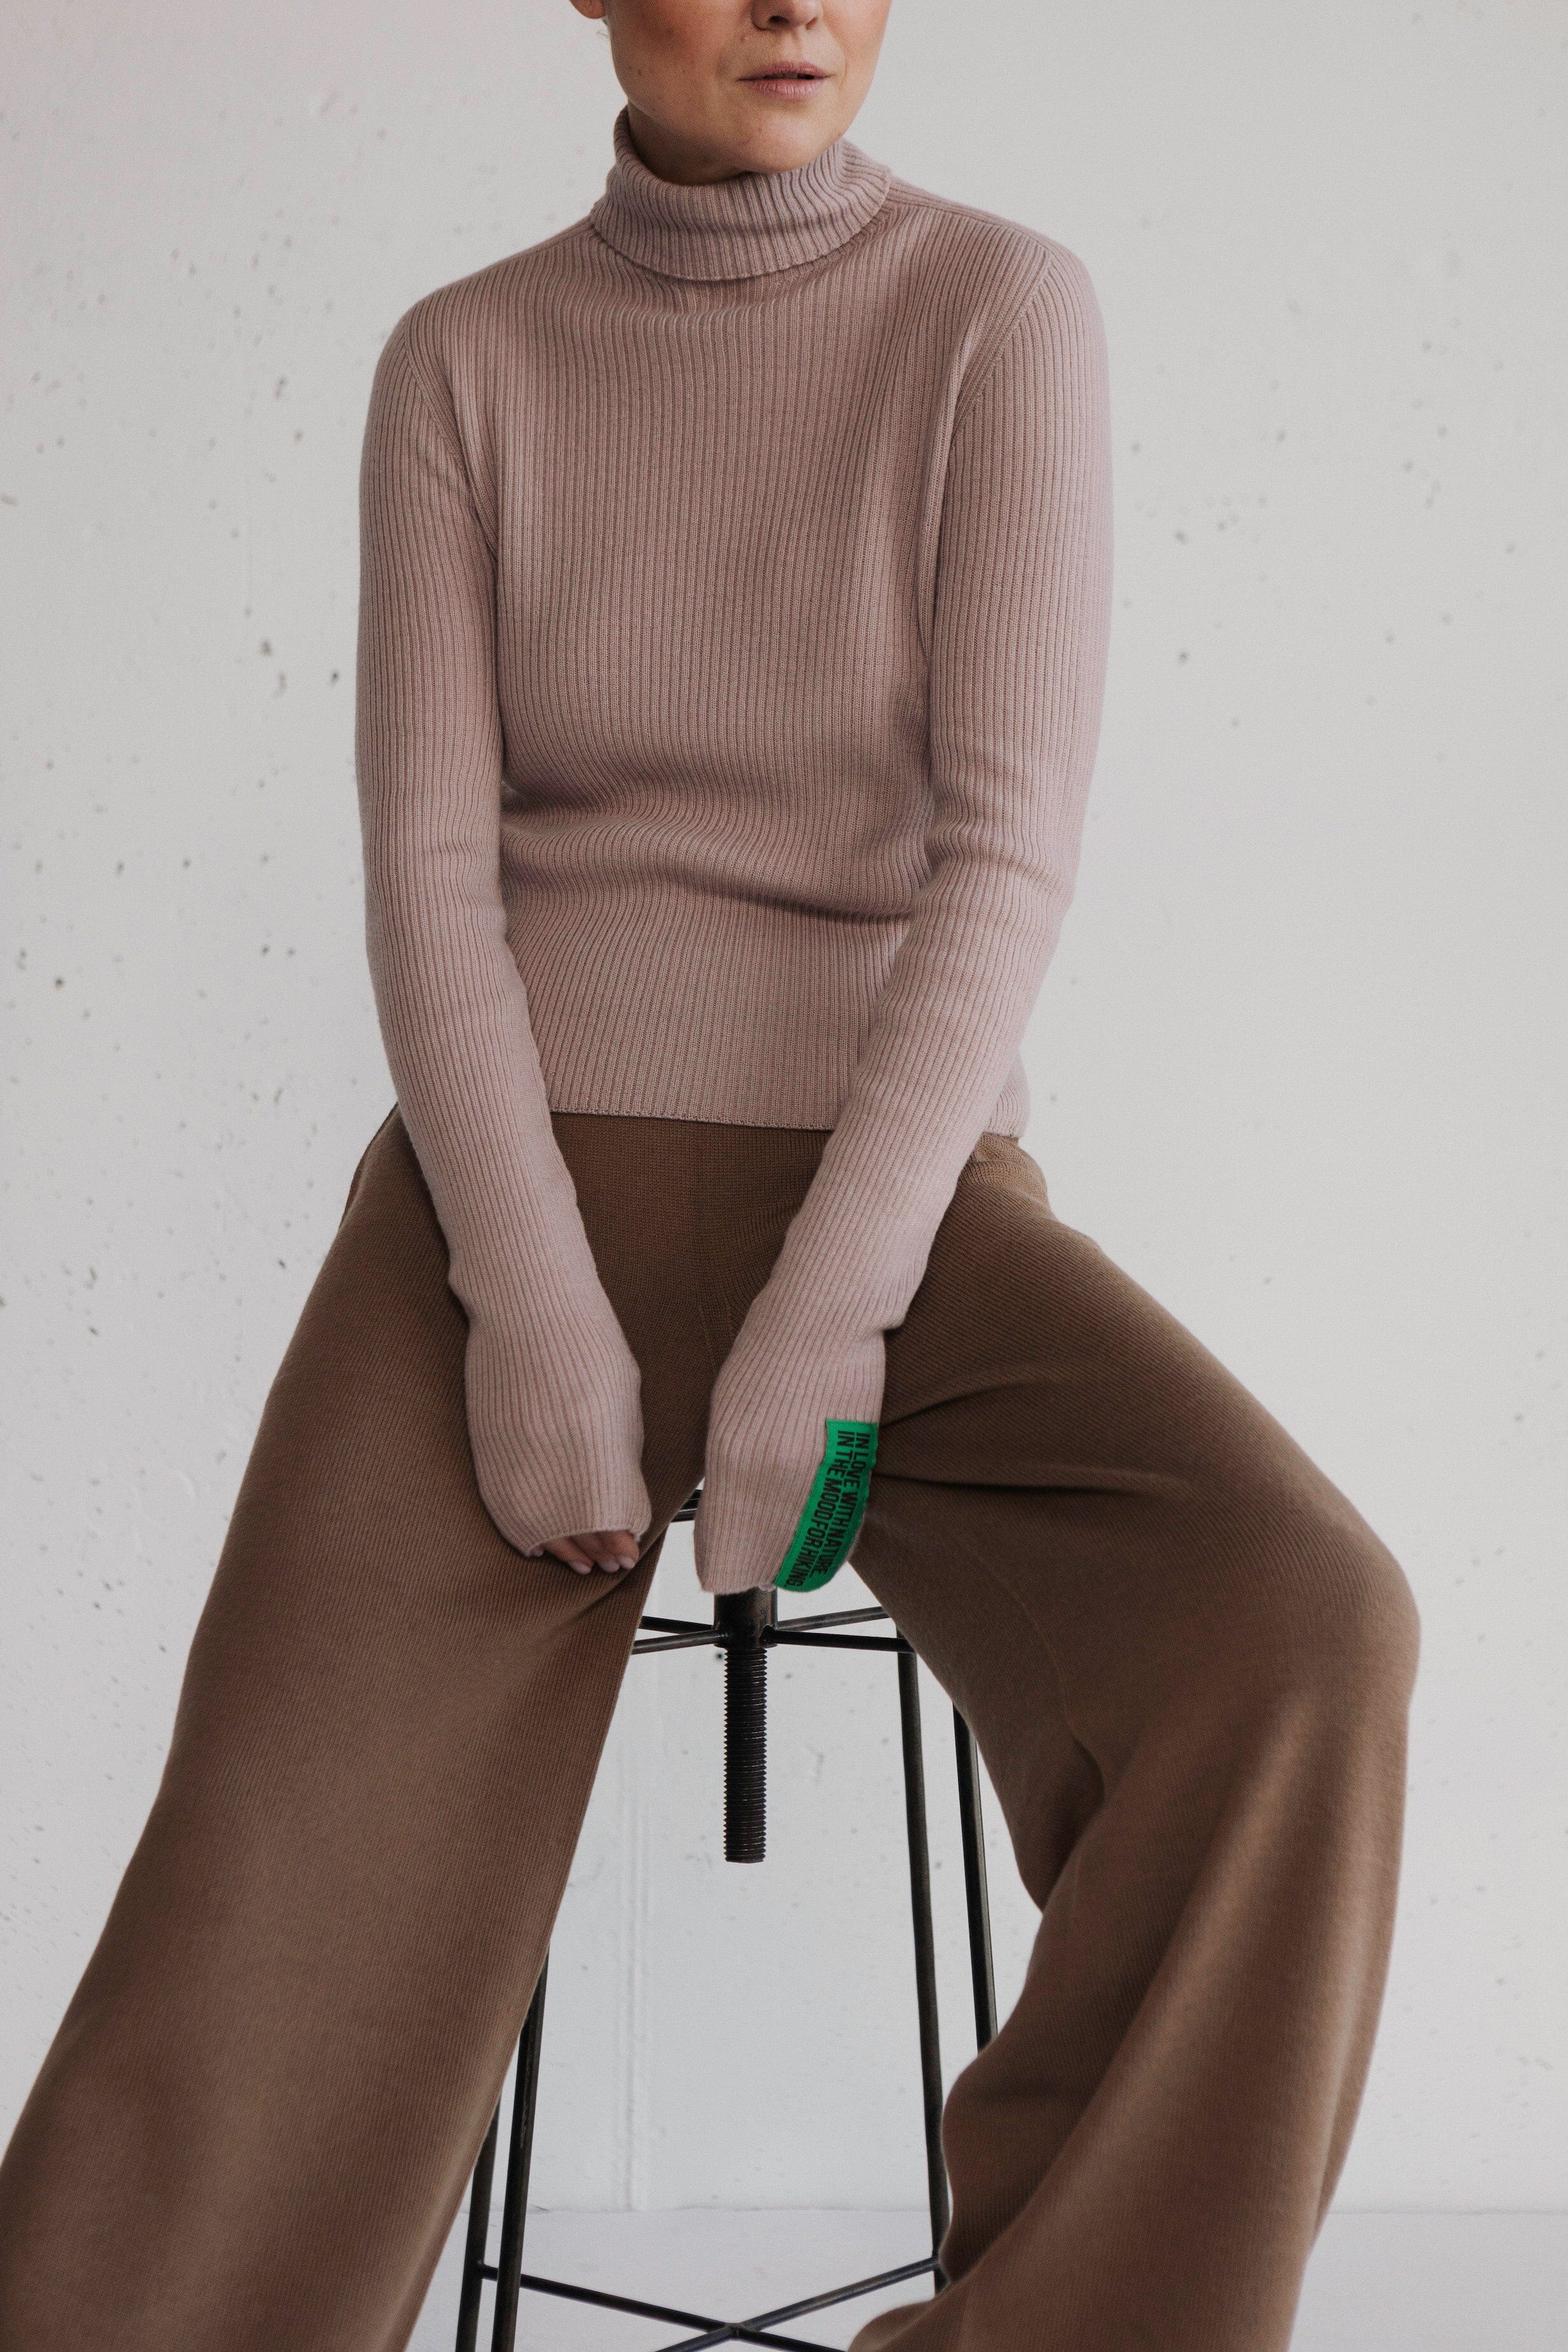 POWDER EXTRA FINE MERINO WOOL TURTLENECK NO. 2 for lovers and trees 